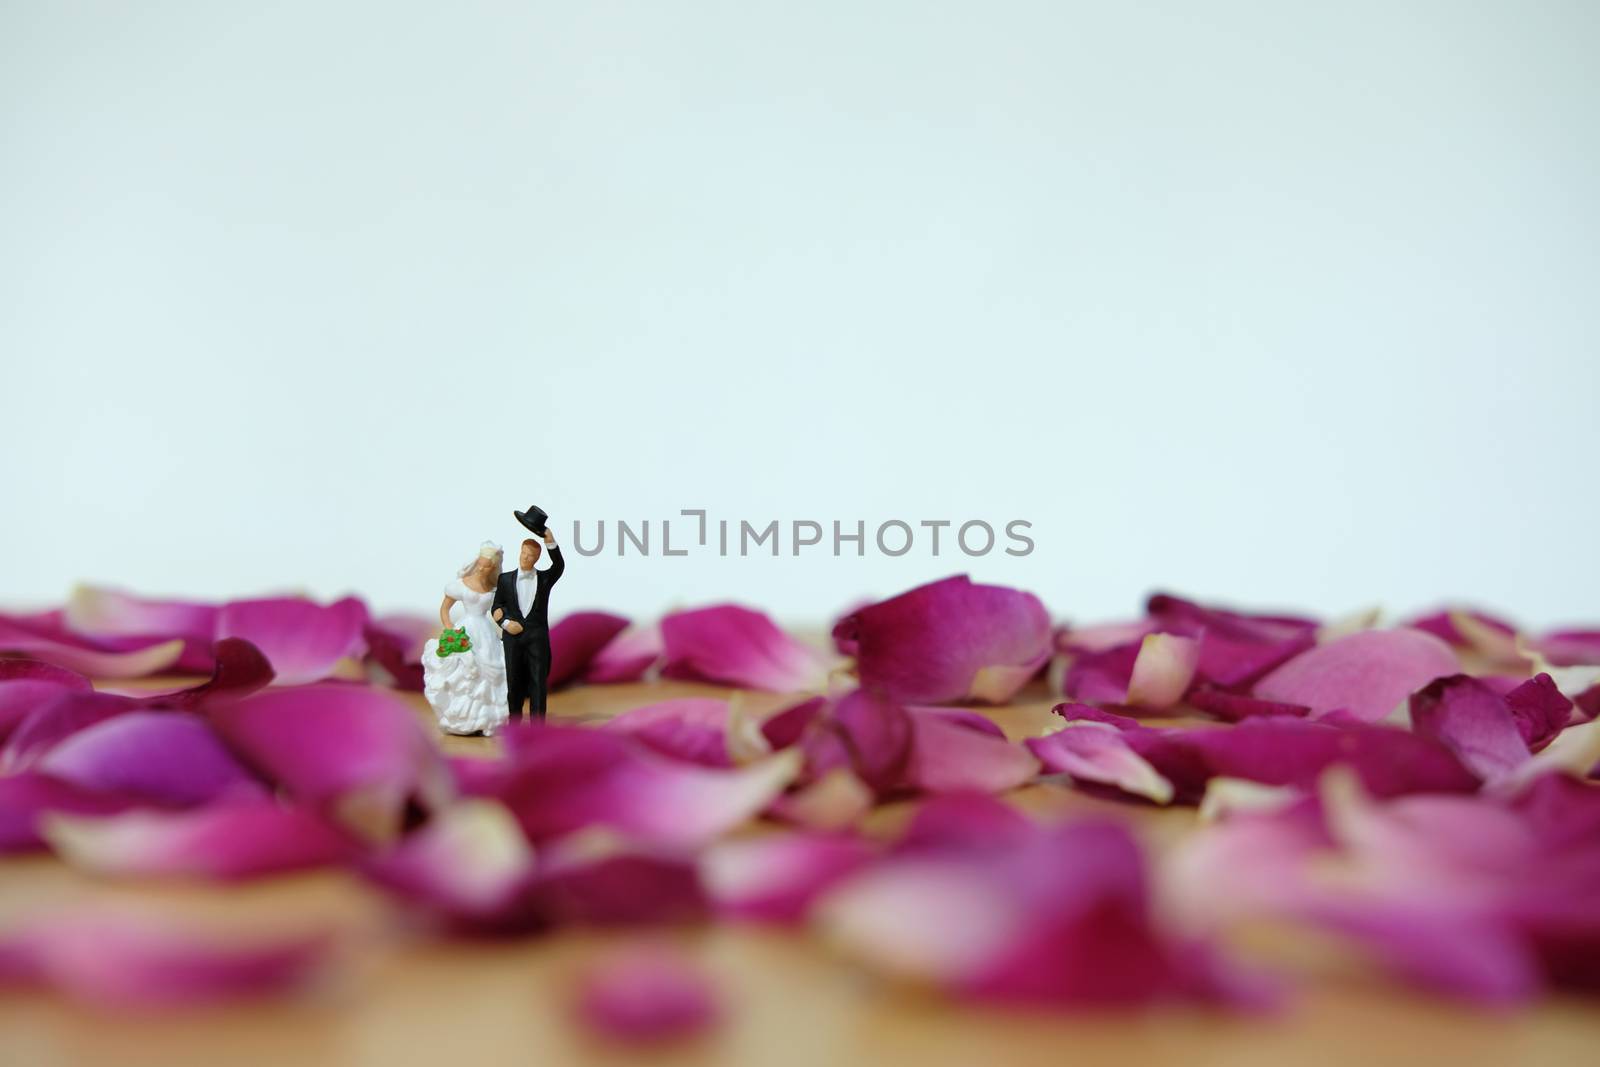 Miniature photography - outdoor wedding / garden wedding ceremony concept, bride and groom walking on red rose flower pile by Macrostud